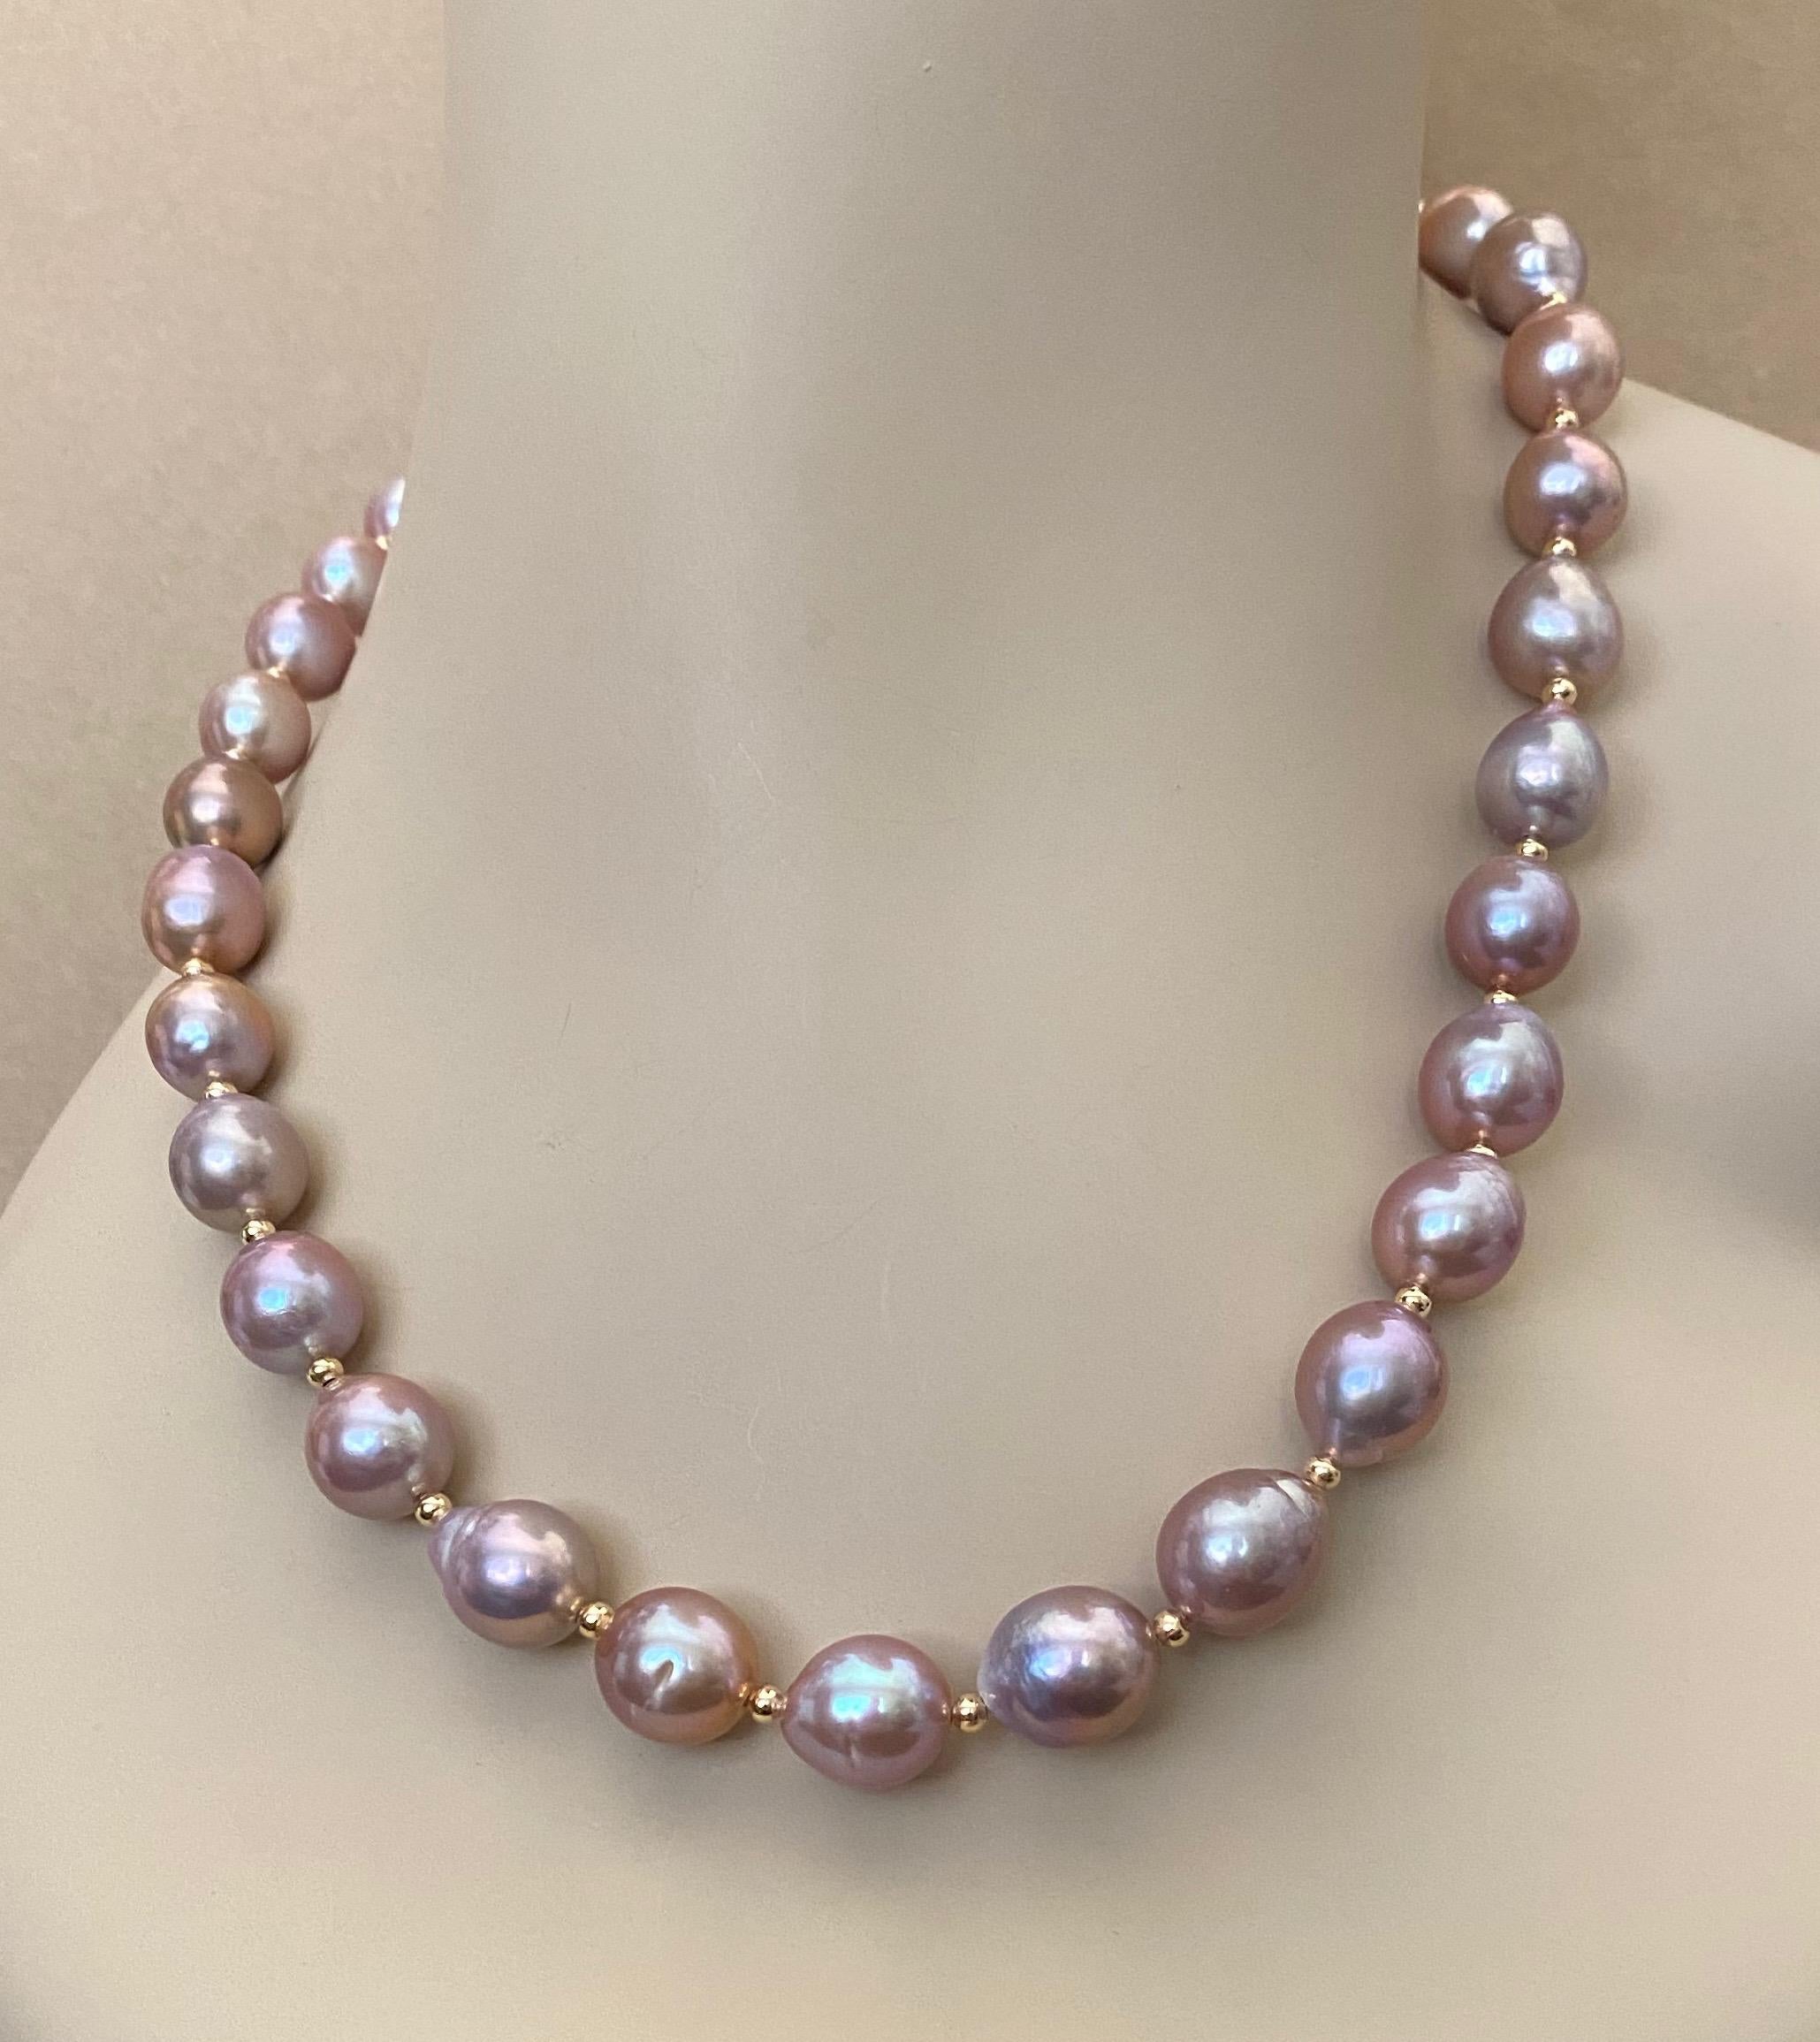 Thirty one lavender baroque pearls form this striking necklace.  The pearls range in size from 11 mm to 15 mm at the center.  They are well matched, possess a glass-like luster and their nacre reflects golds and greens.  The pearls are spaced with